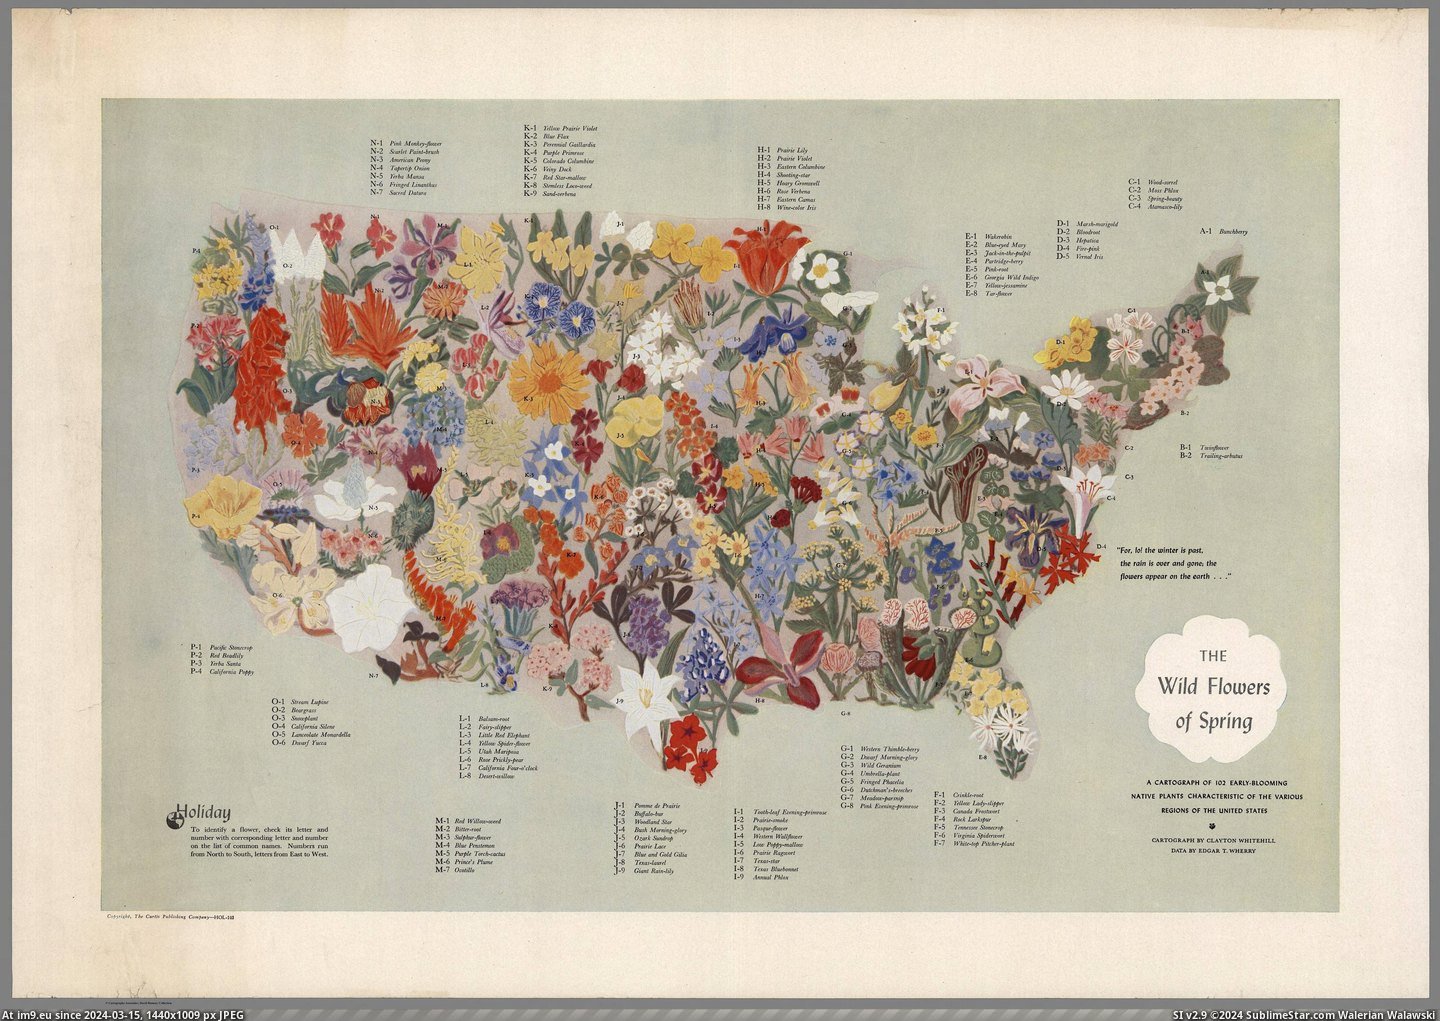 #Wild #Early #Flowers #Native #Plants #Spring #Regions #Blooming [Mapporn] The Wild Flowers of Spring, a carthograph of 102 early-blooming native plants characteristic of the various regions of Pic. (Image of album My r/MAPS favs))